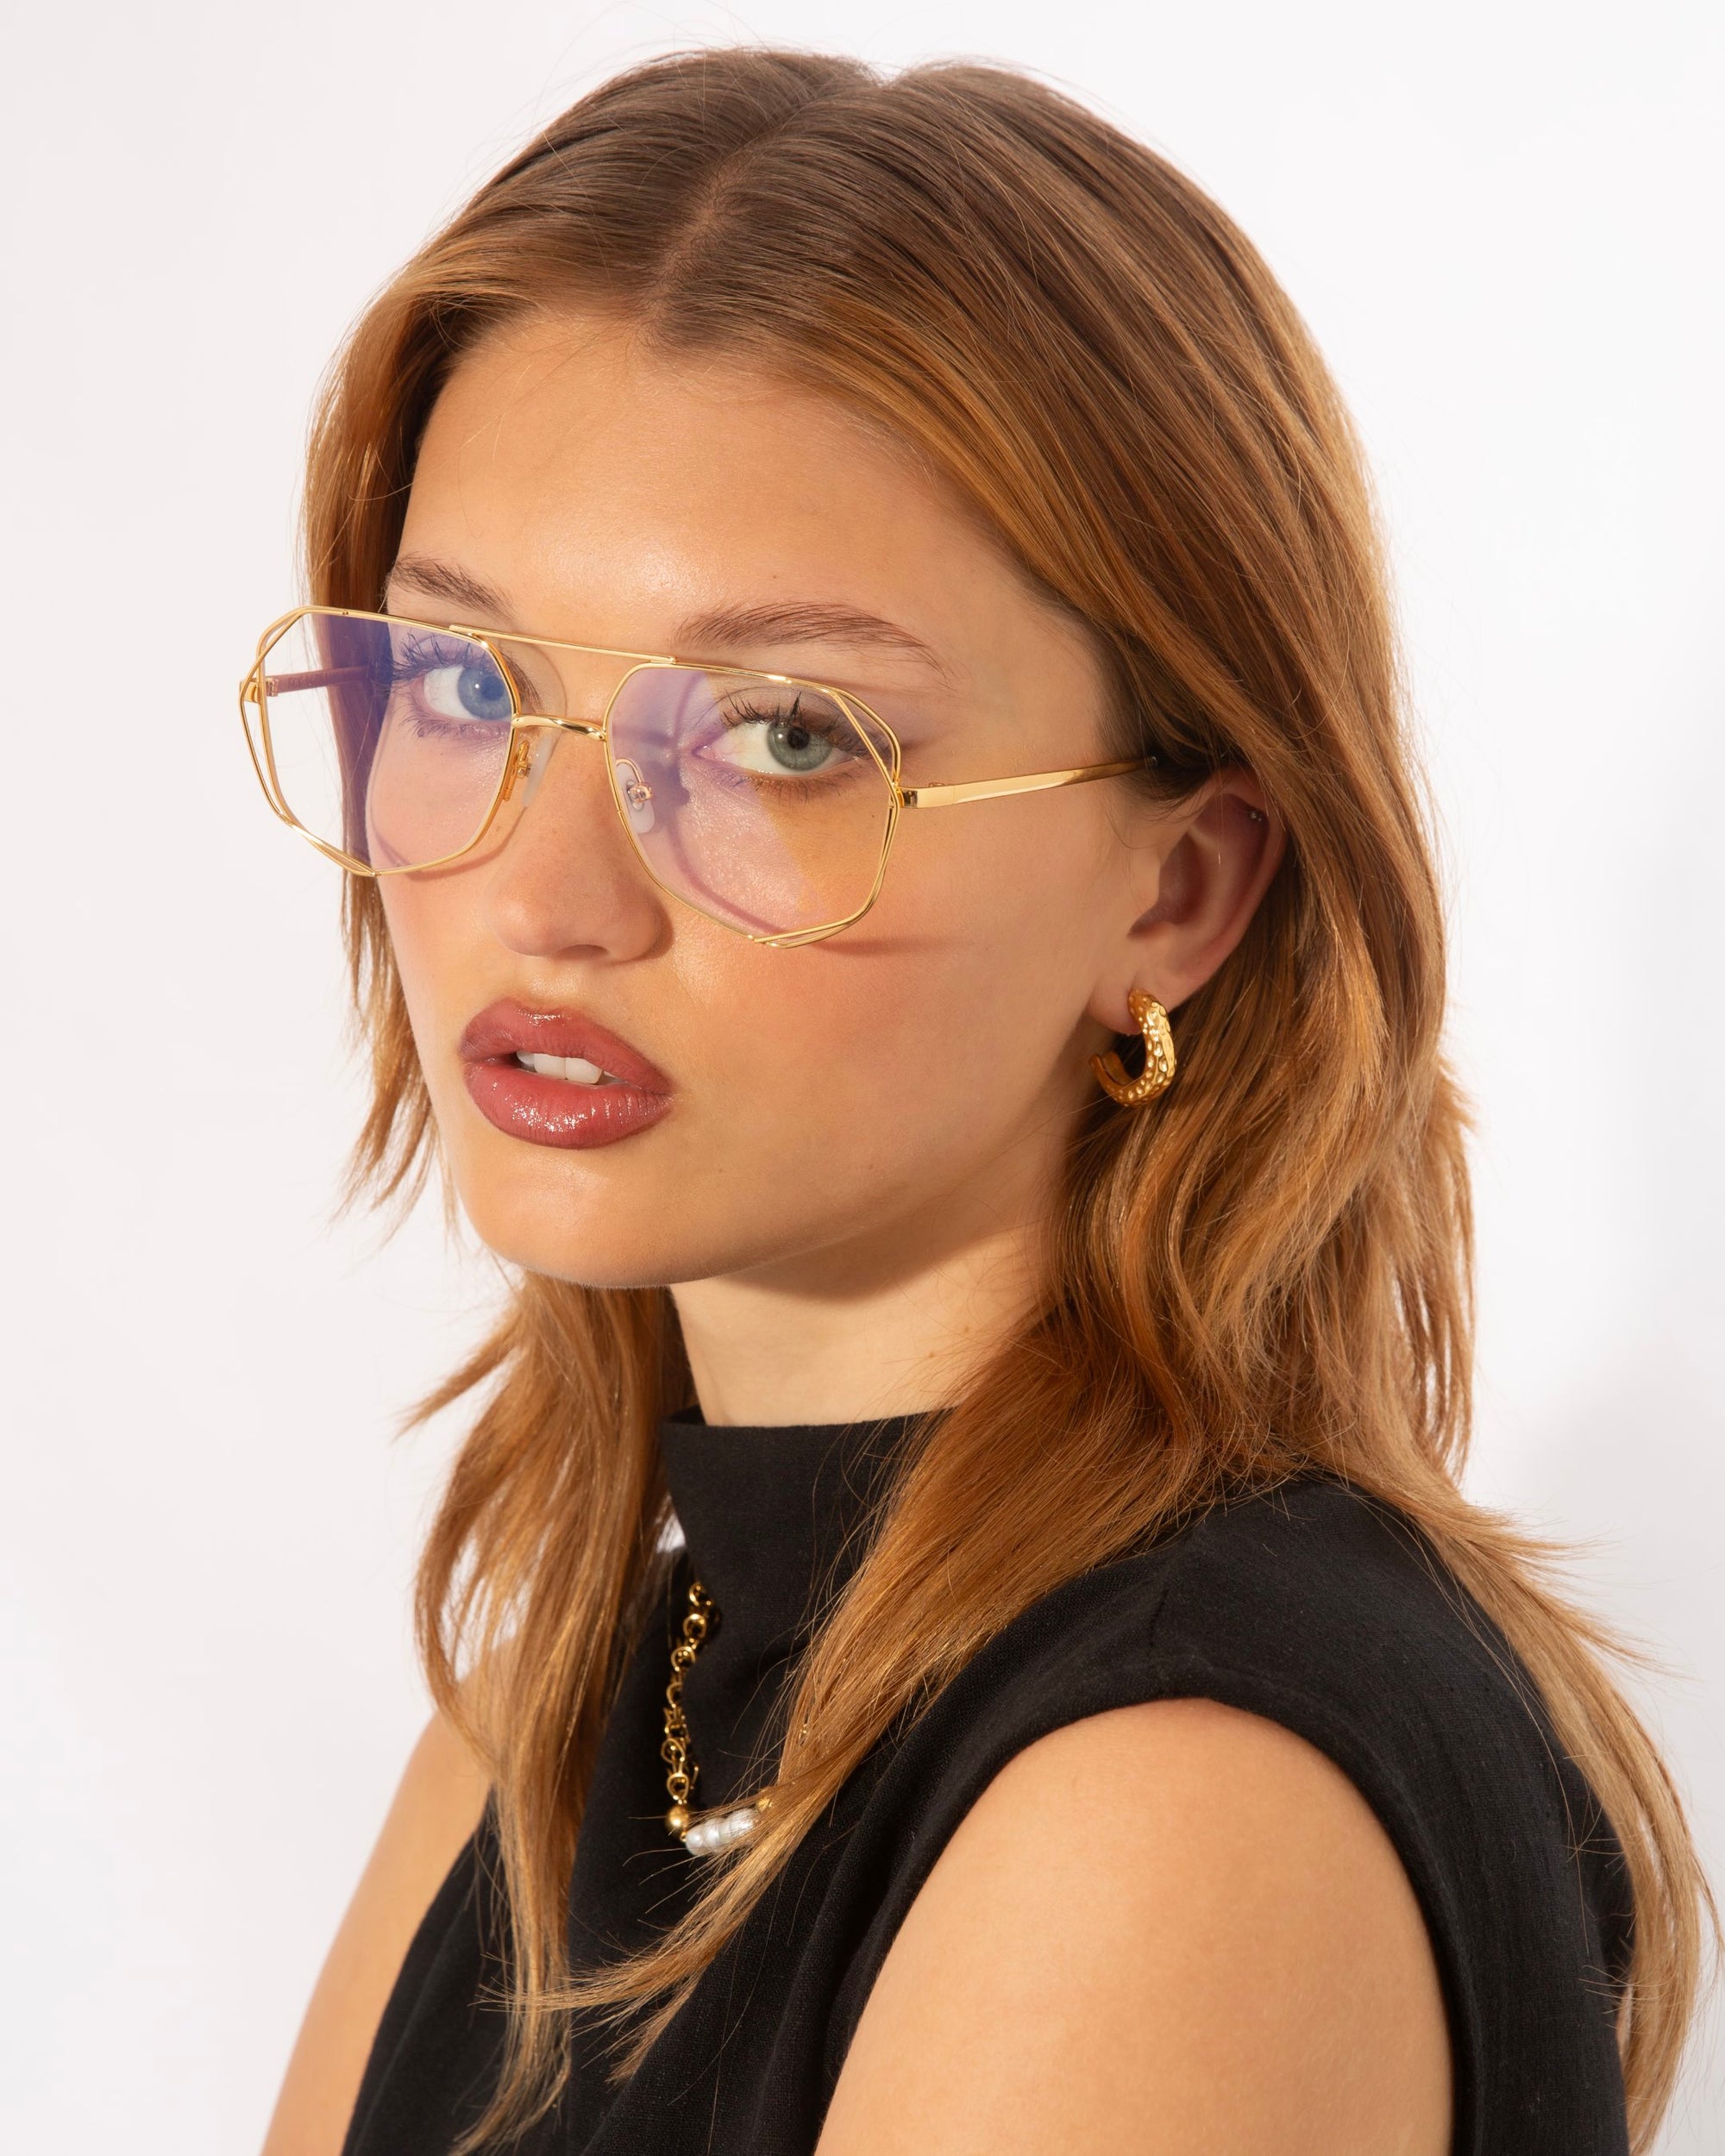 A person with shoulder-length, light brown hair wears large, gold-rimmed glasses featuring UV protection lenses with a purple tint. They have gold hoop earrings and a necklace and are dressed in a sleeveless black top. The person looks directly at the camera against a plain white background, wearing For Art&#39;s Sake® Genius Two glasses.